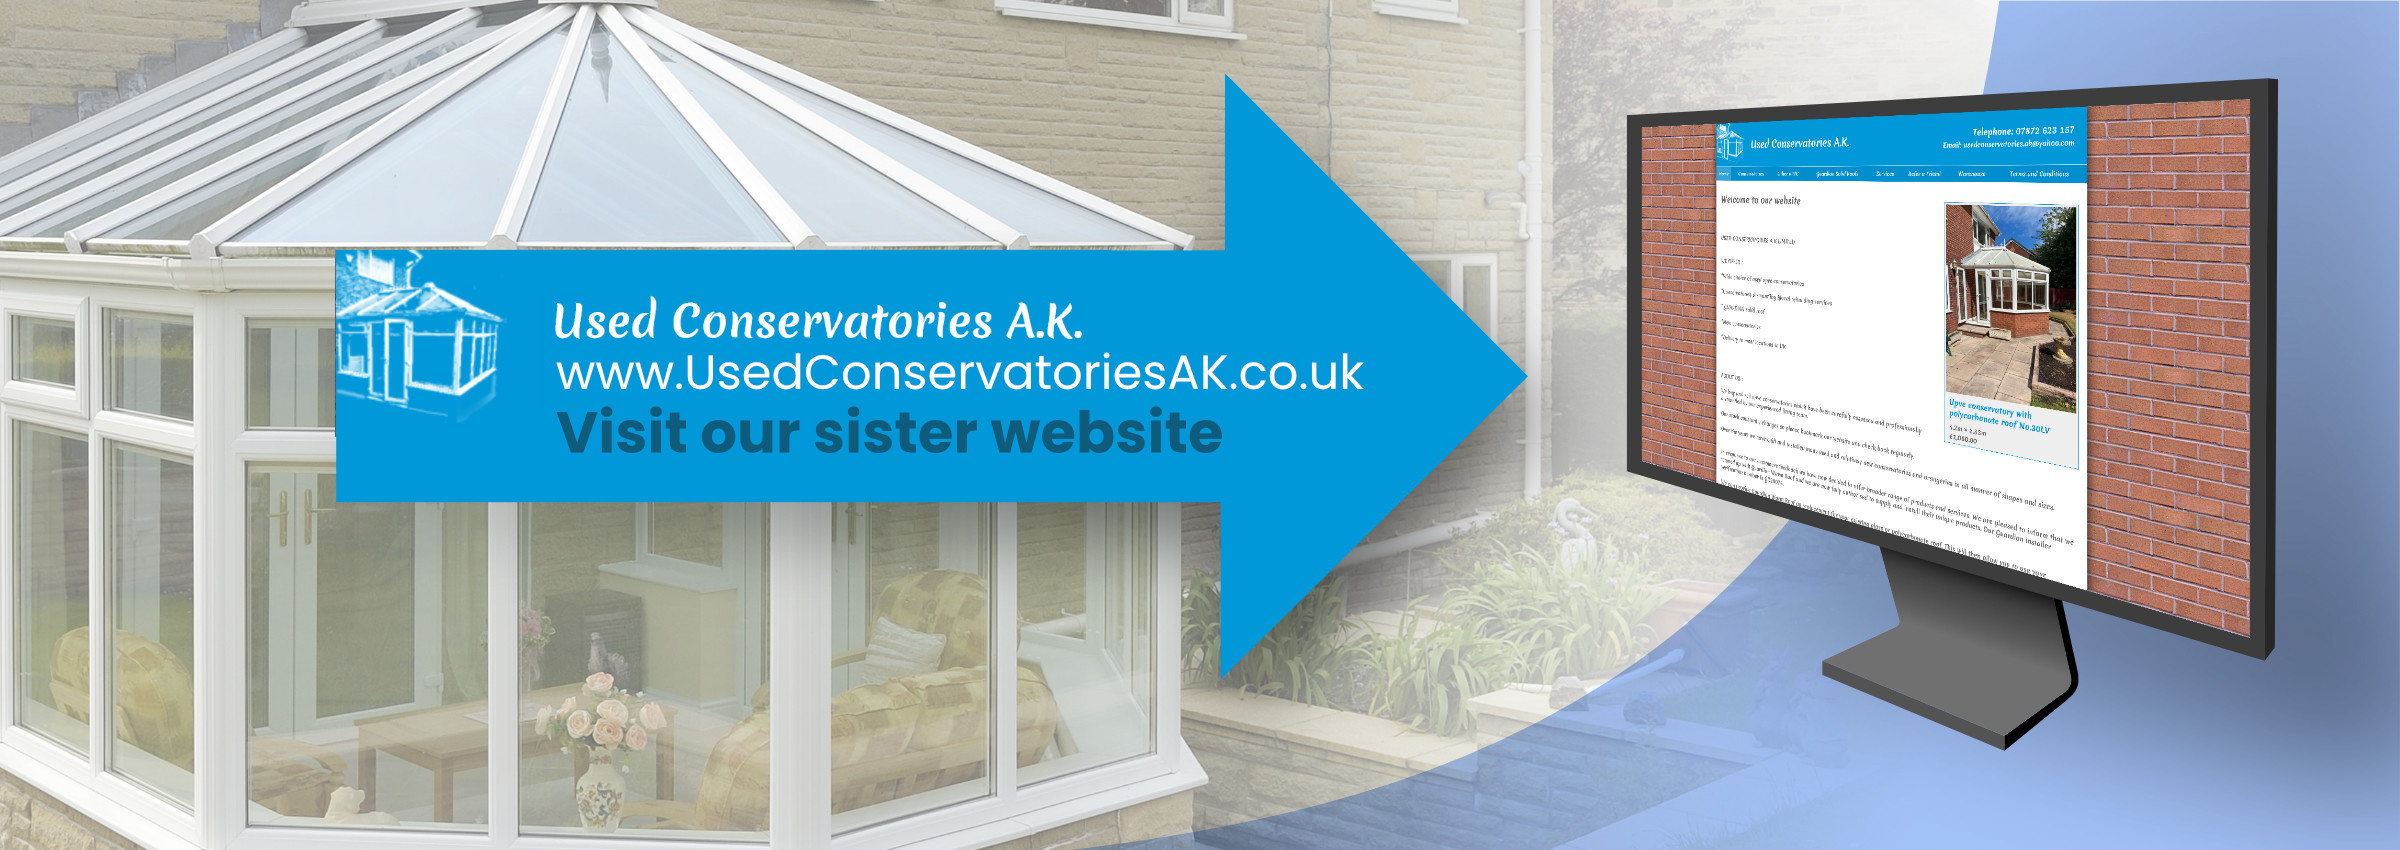 Used Conservatories AK